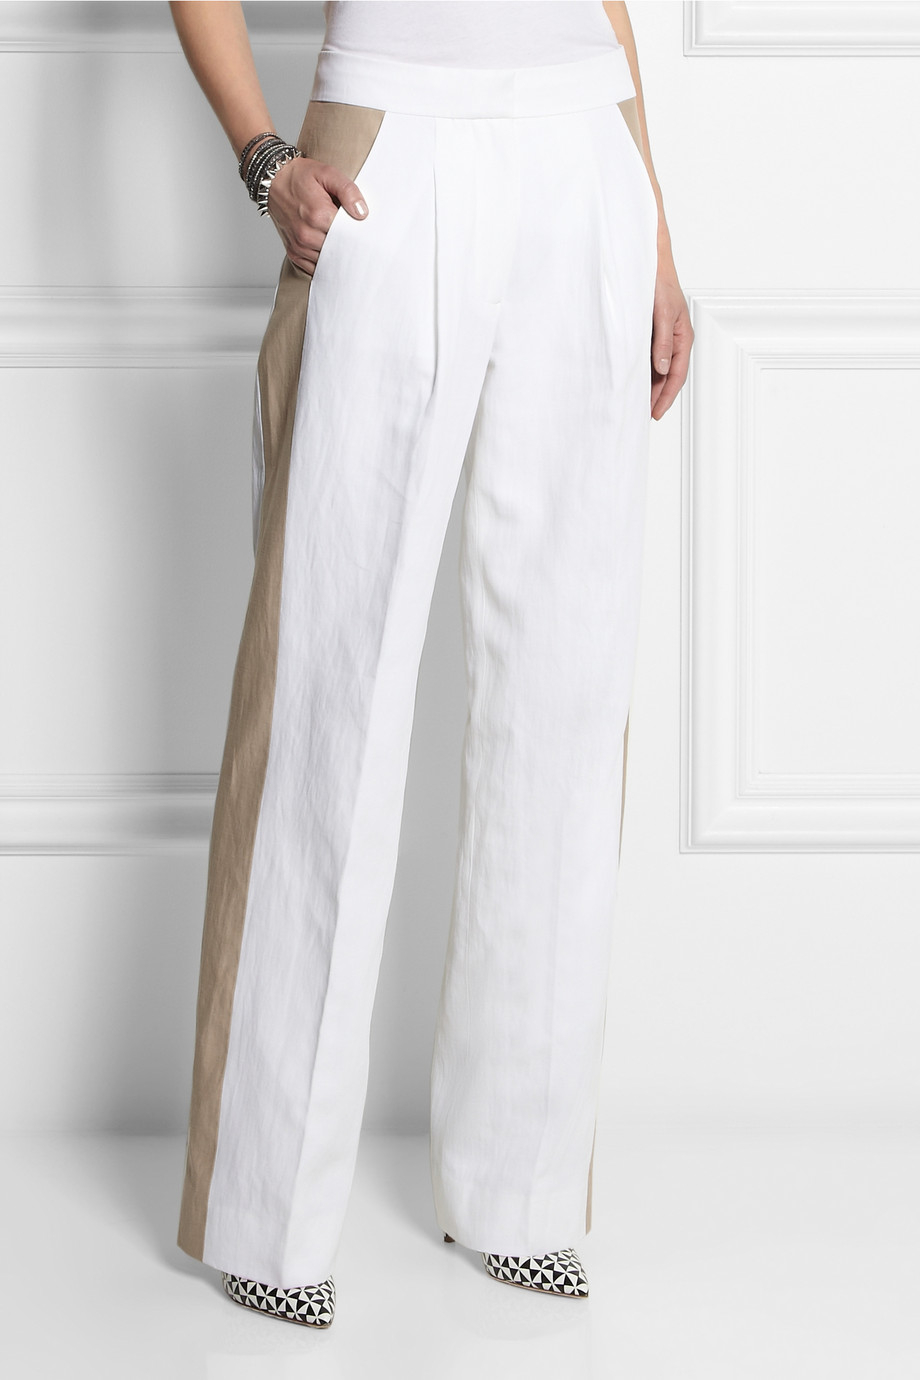 Lyst - J.Crew Collection Cotton And Linen-Blend Wide-Leg Pants in White